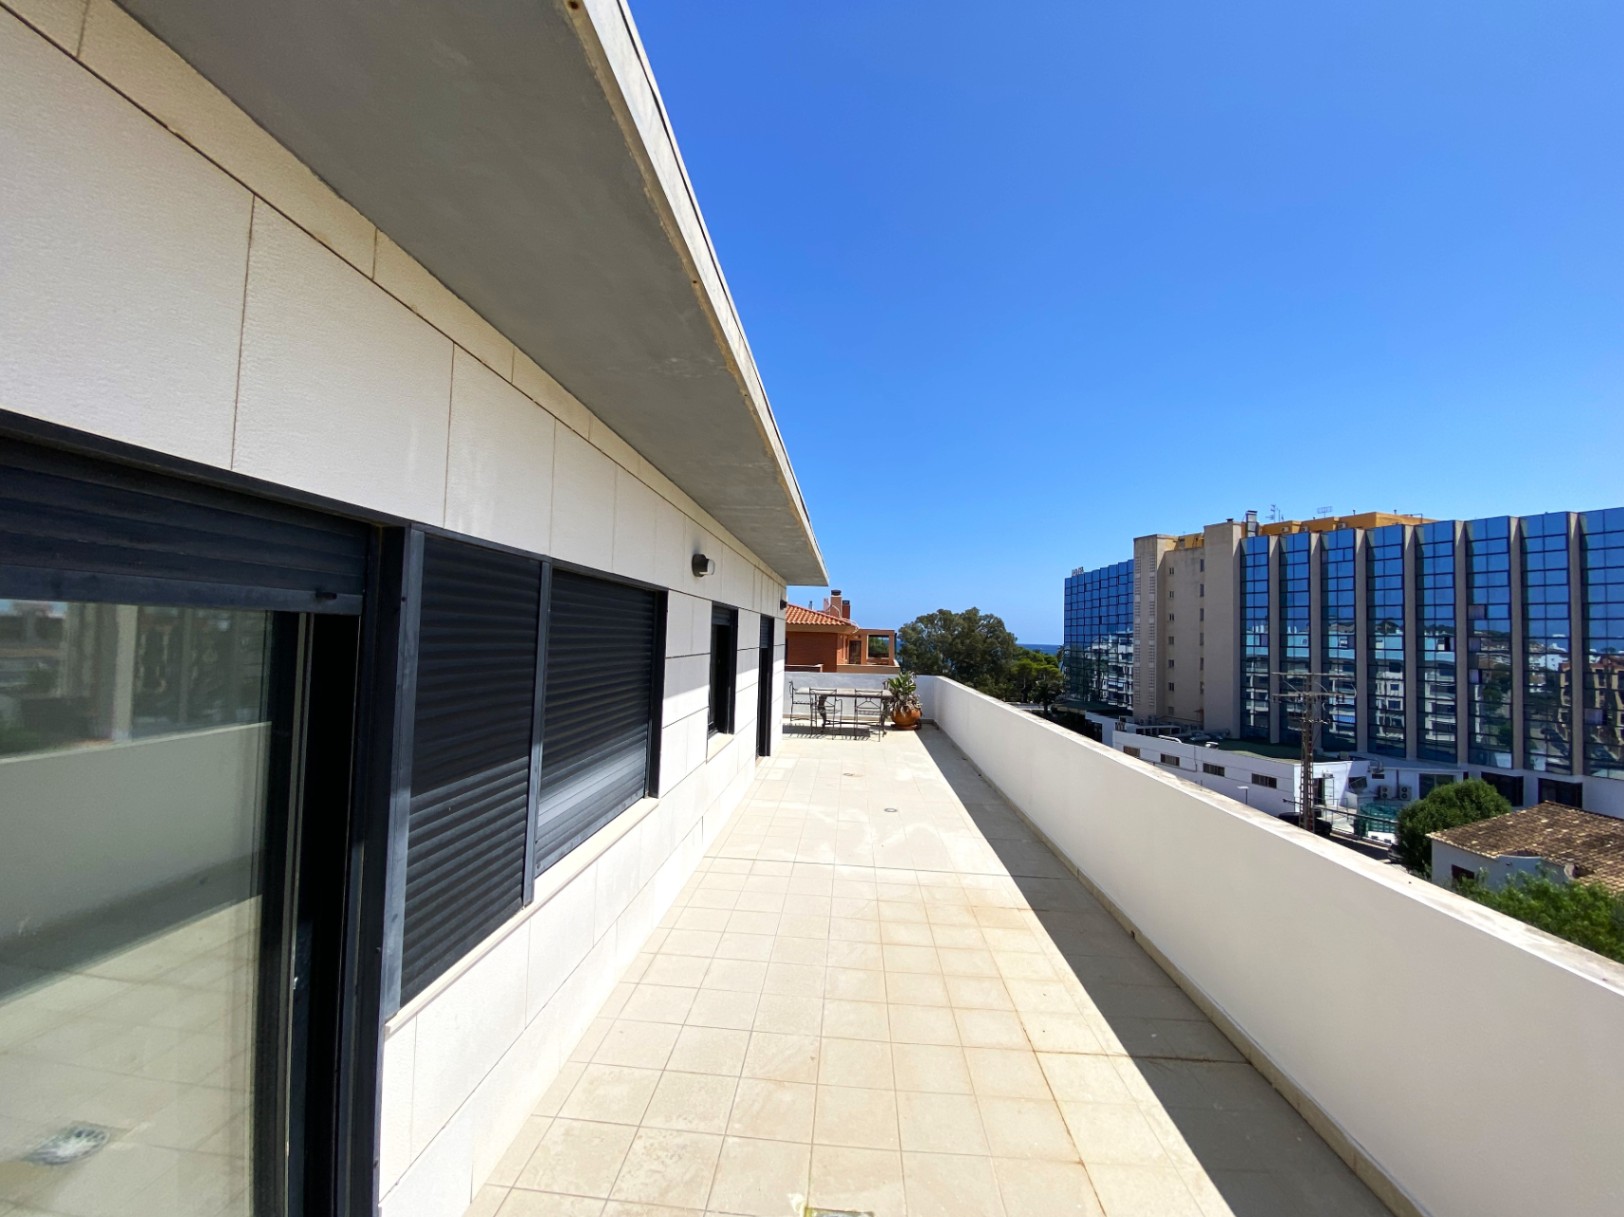 Penthouse for sale in Dénia near the center